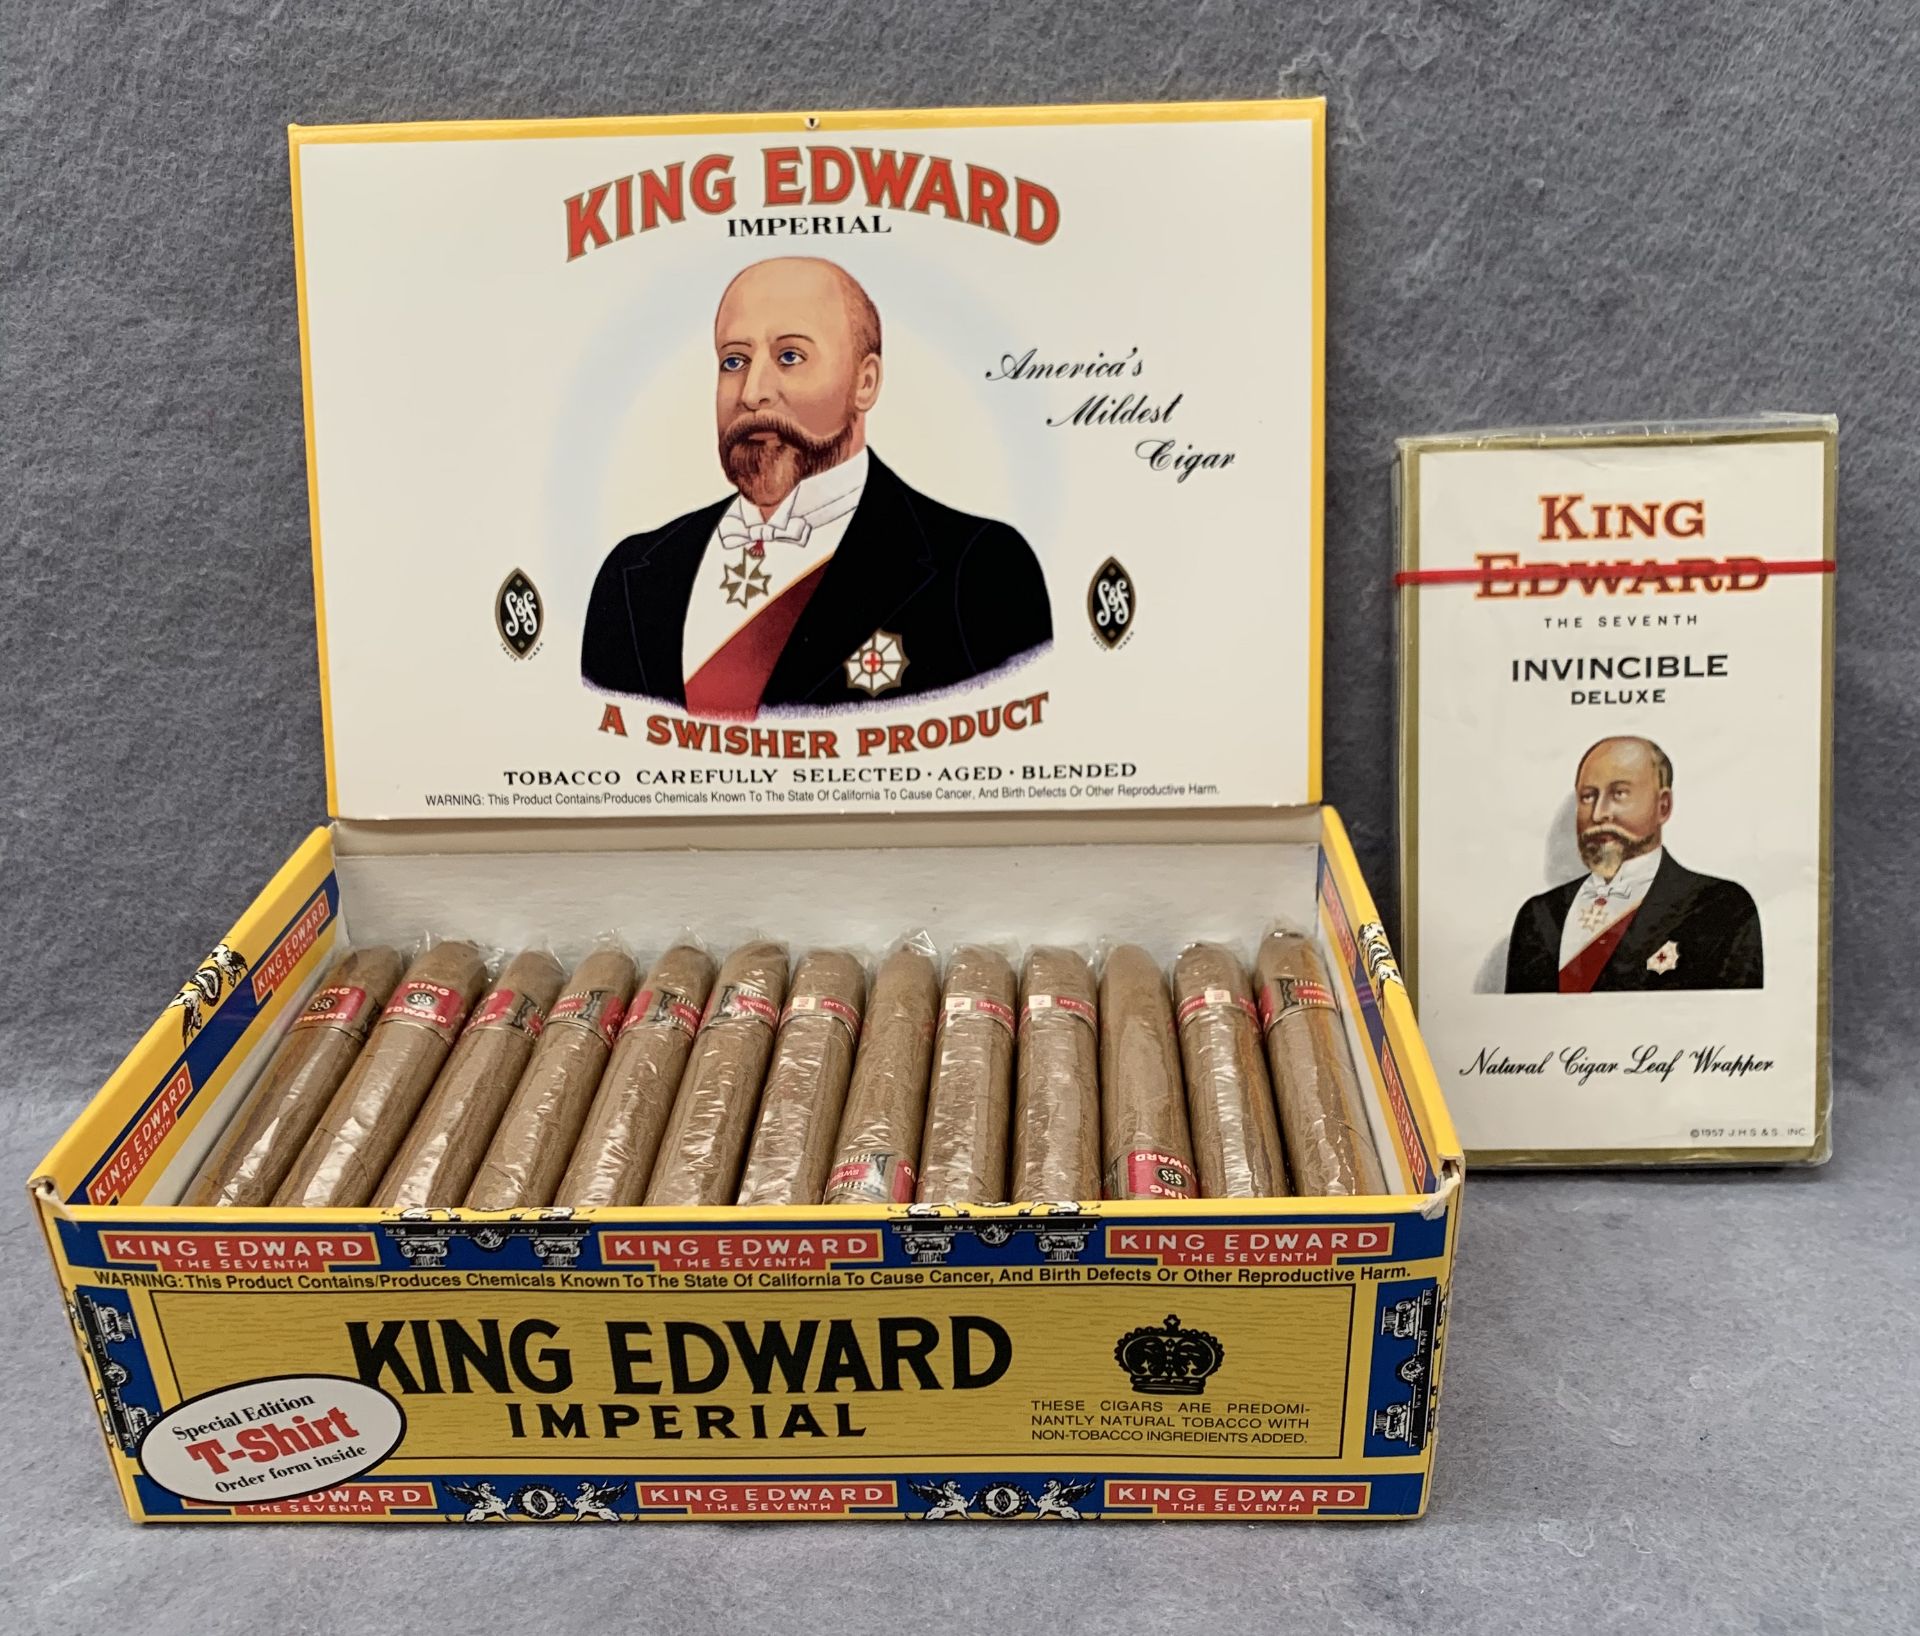 37 King Edward Imperial cigars in presentation box and a packet of five King Edward Invincible